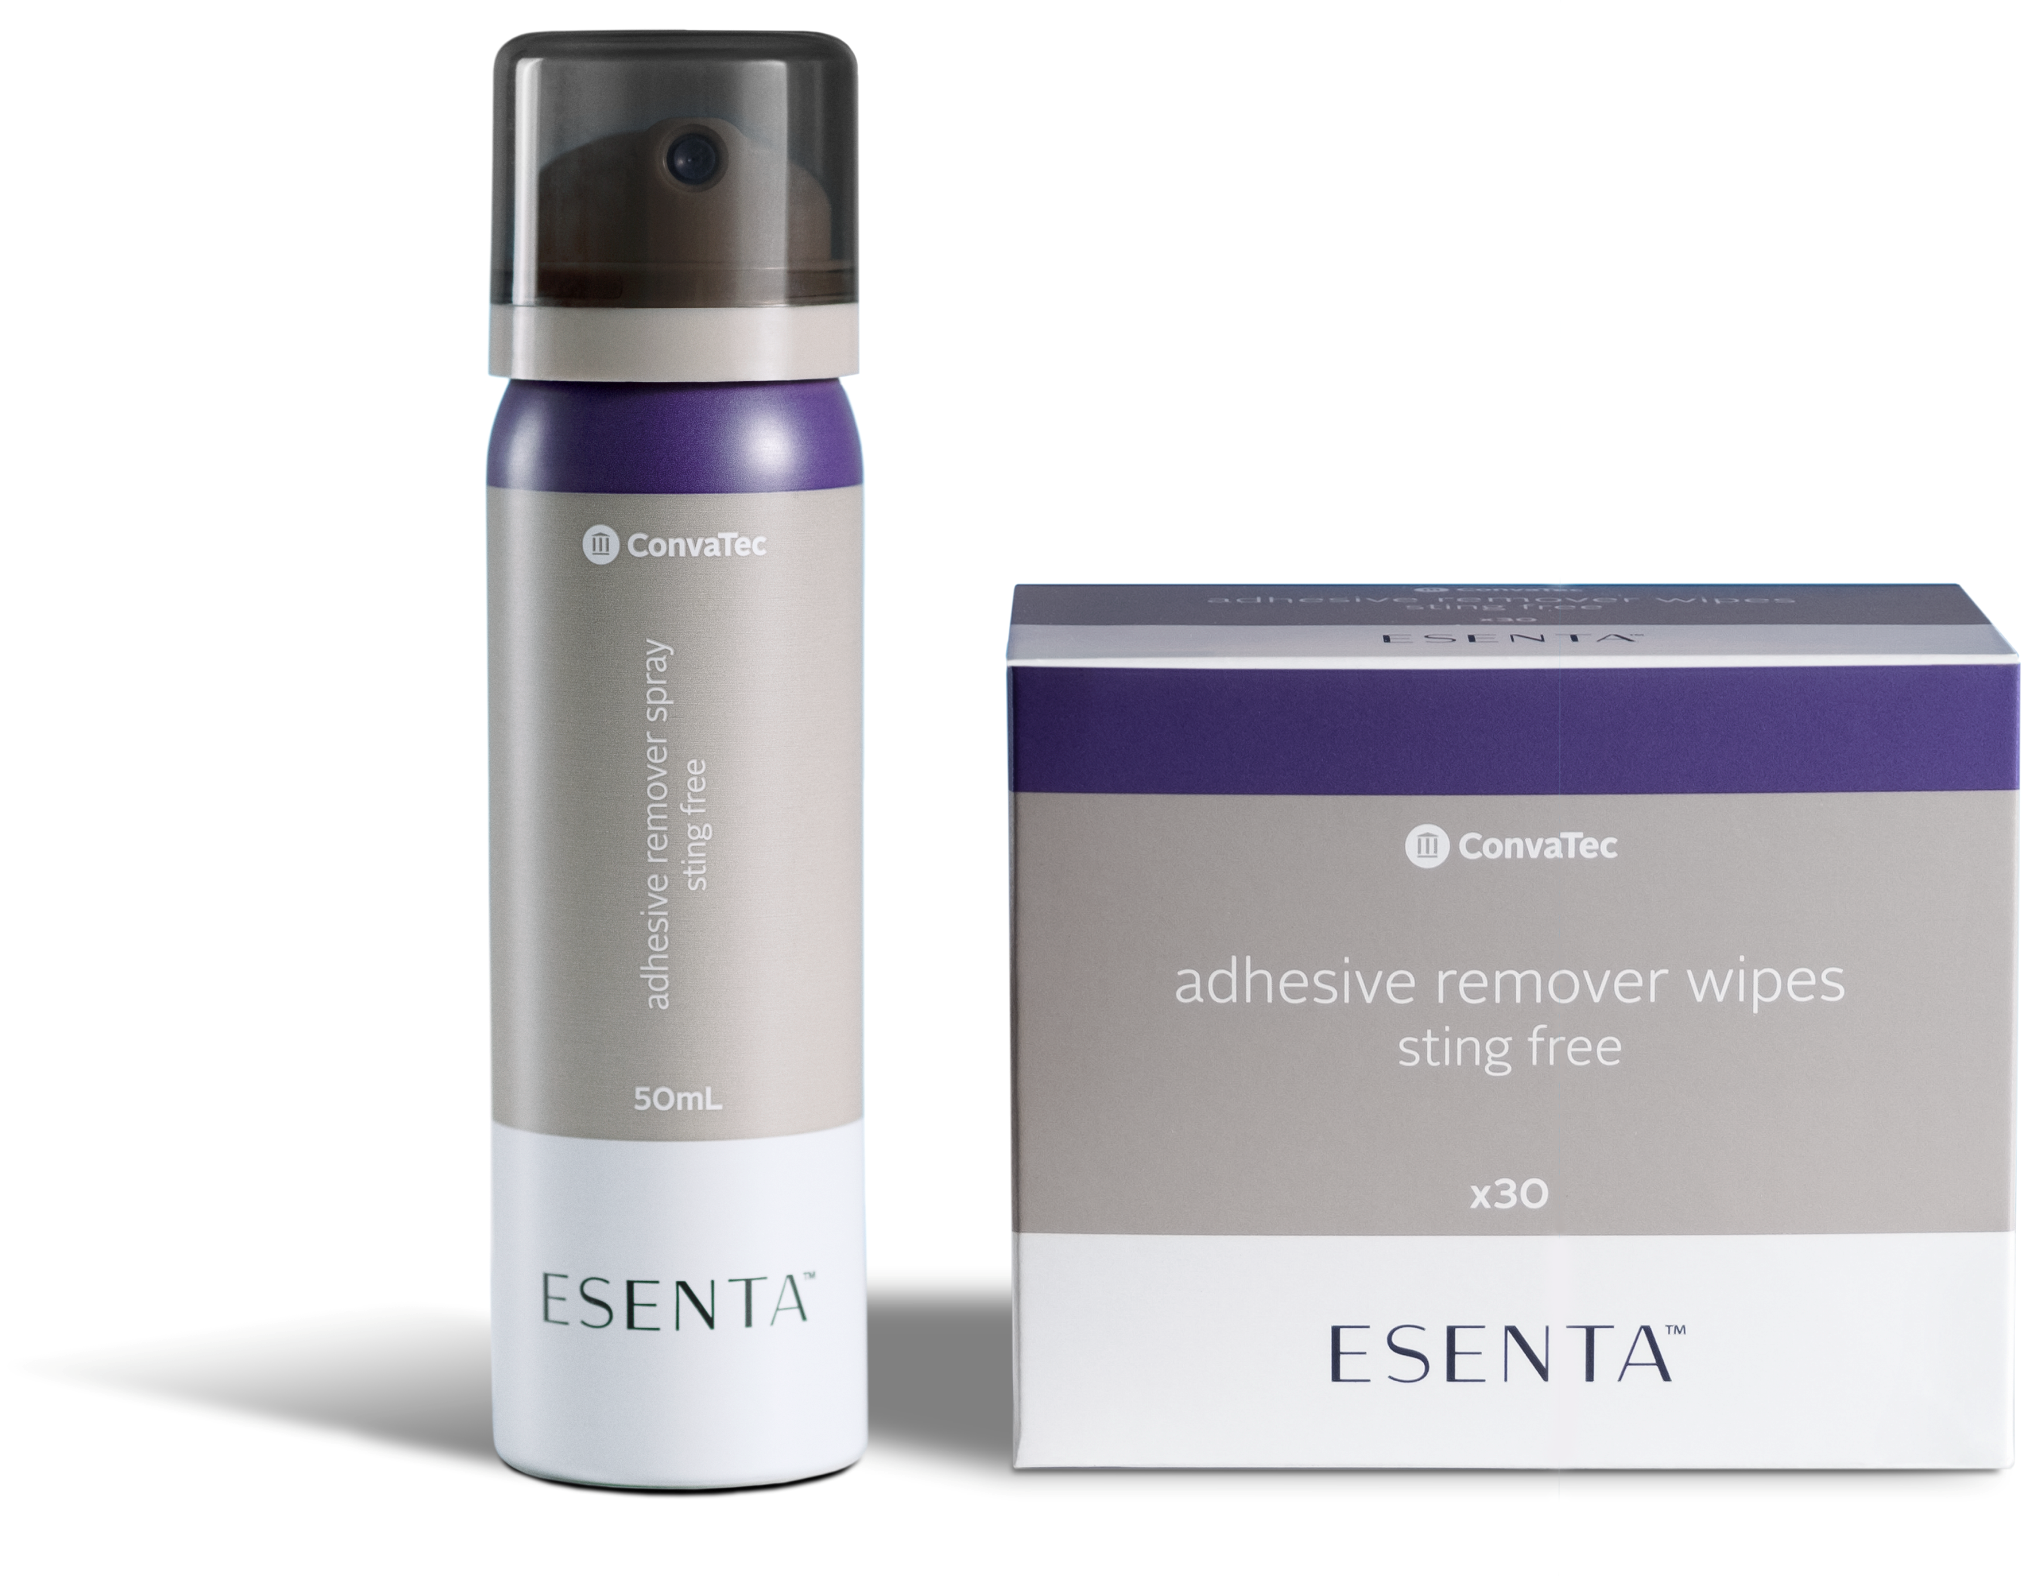 Esenta sting free adhesive remover wipes and spray